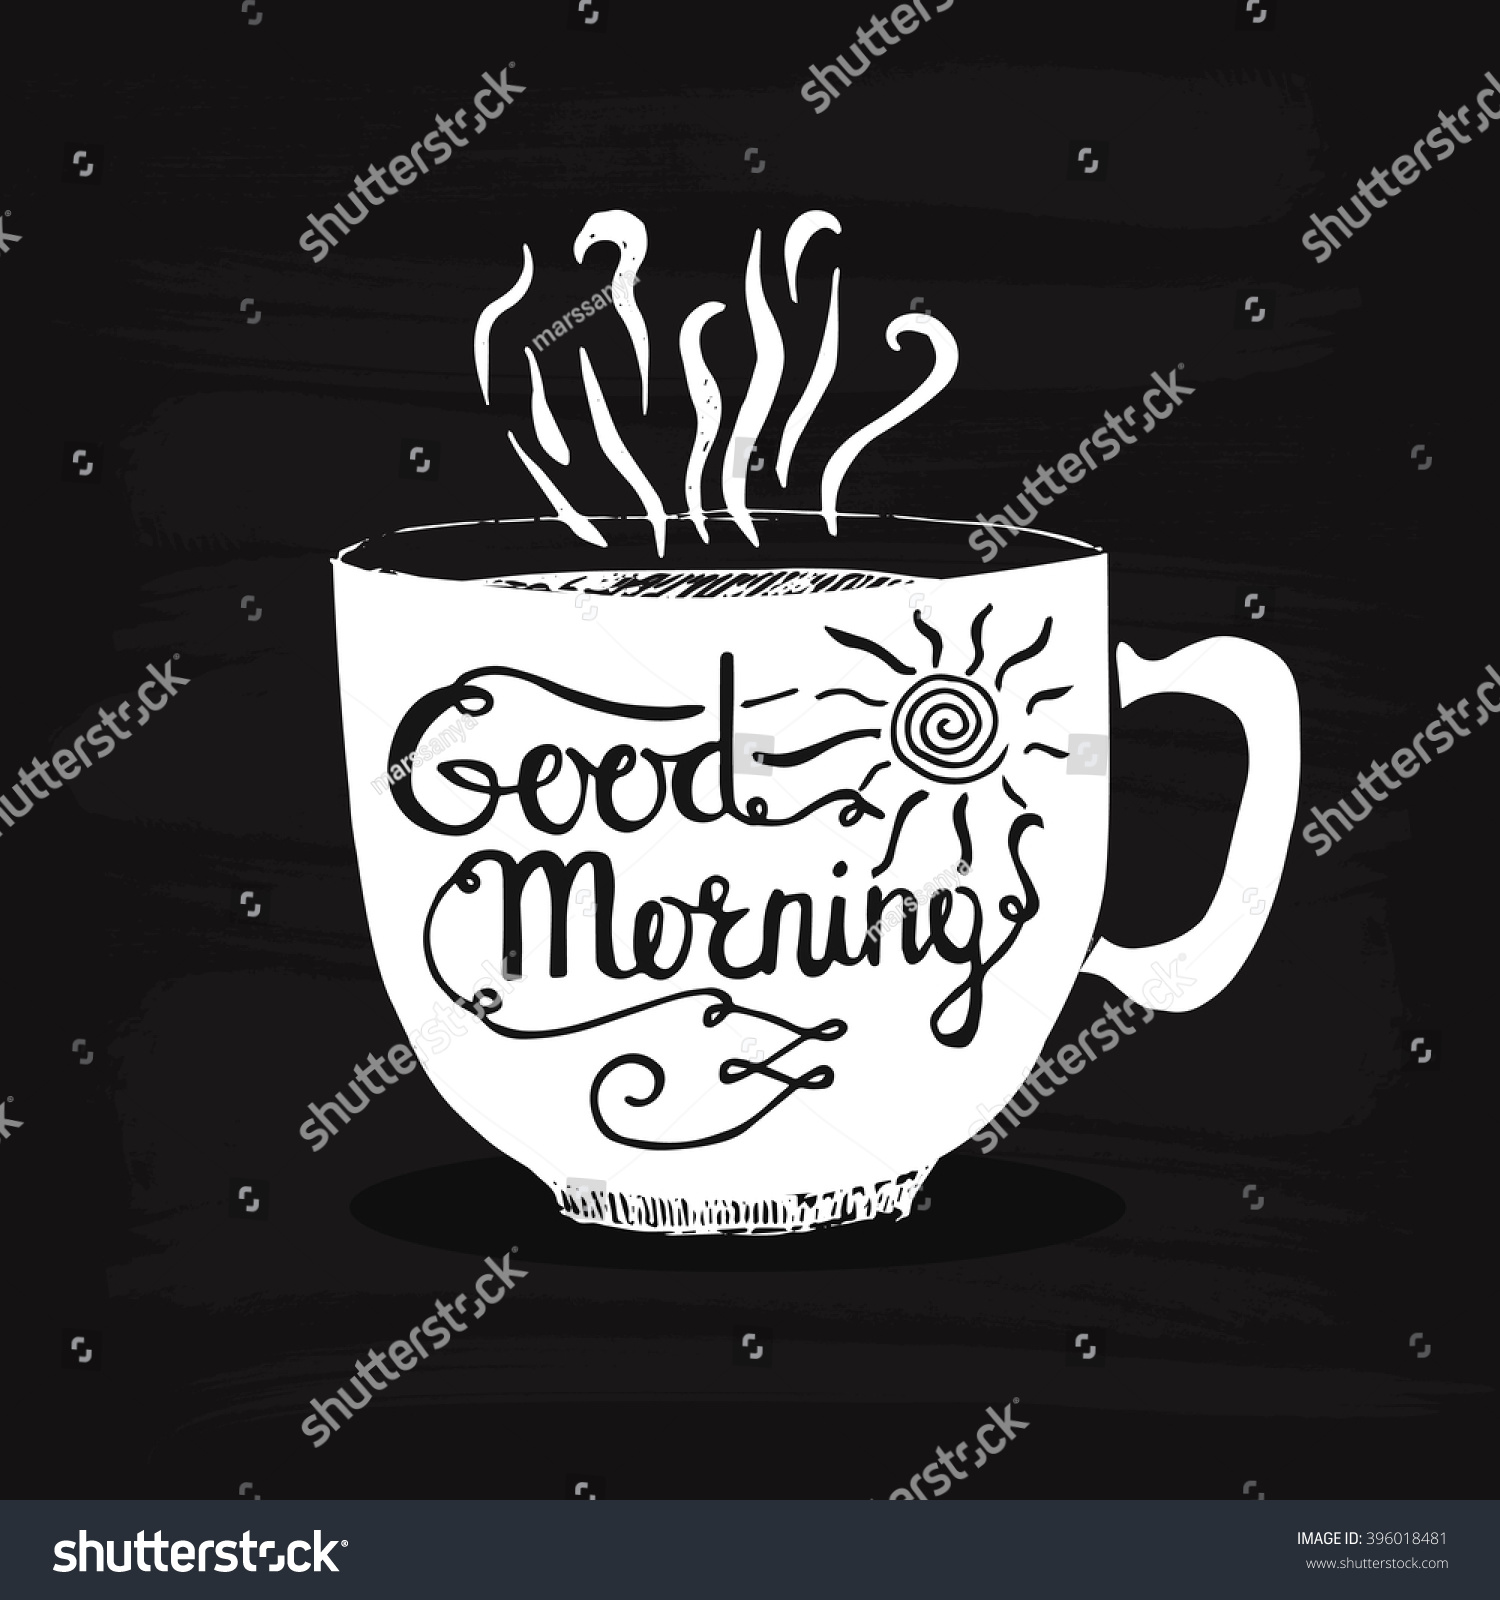 Good Morning Cup With Hand Drawn Lettering. Sketch Of Cup Of Coffee Or ...